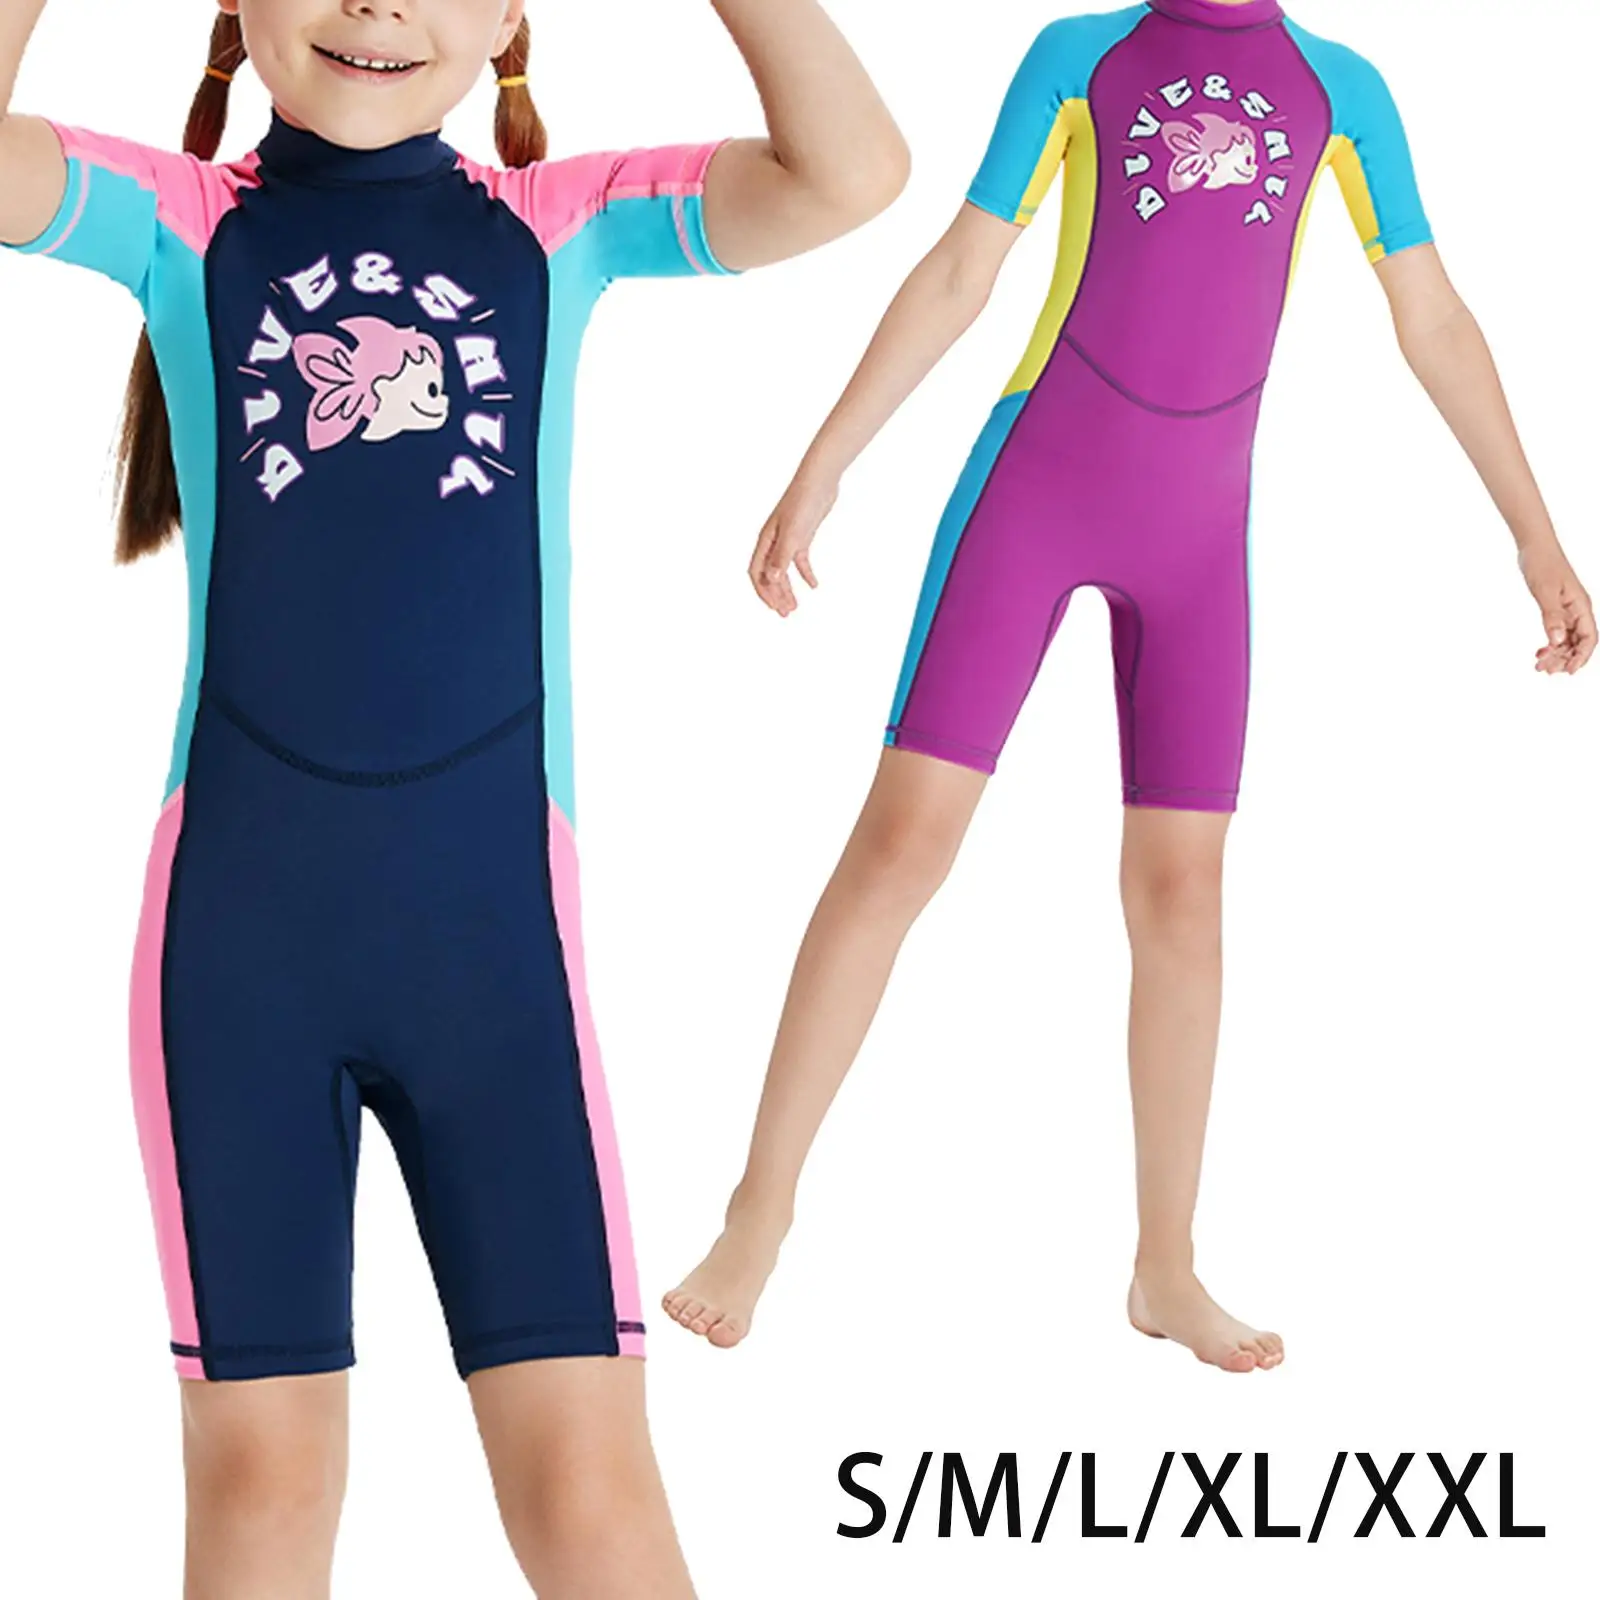 

Girls Wetsuit Waterproof Kids Diving Swimsuits for Surfing Boating Sailing